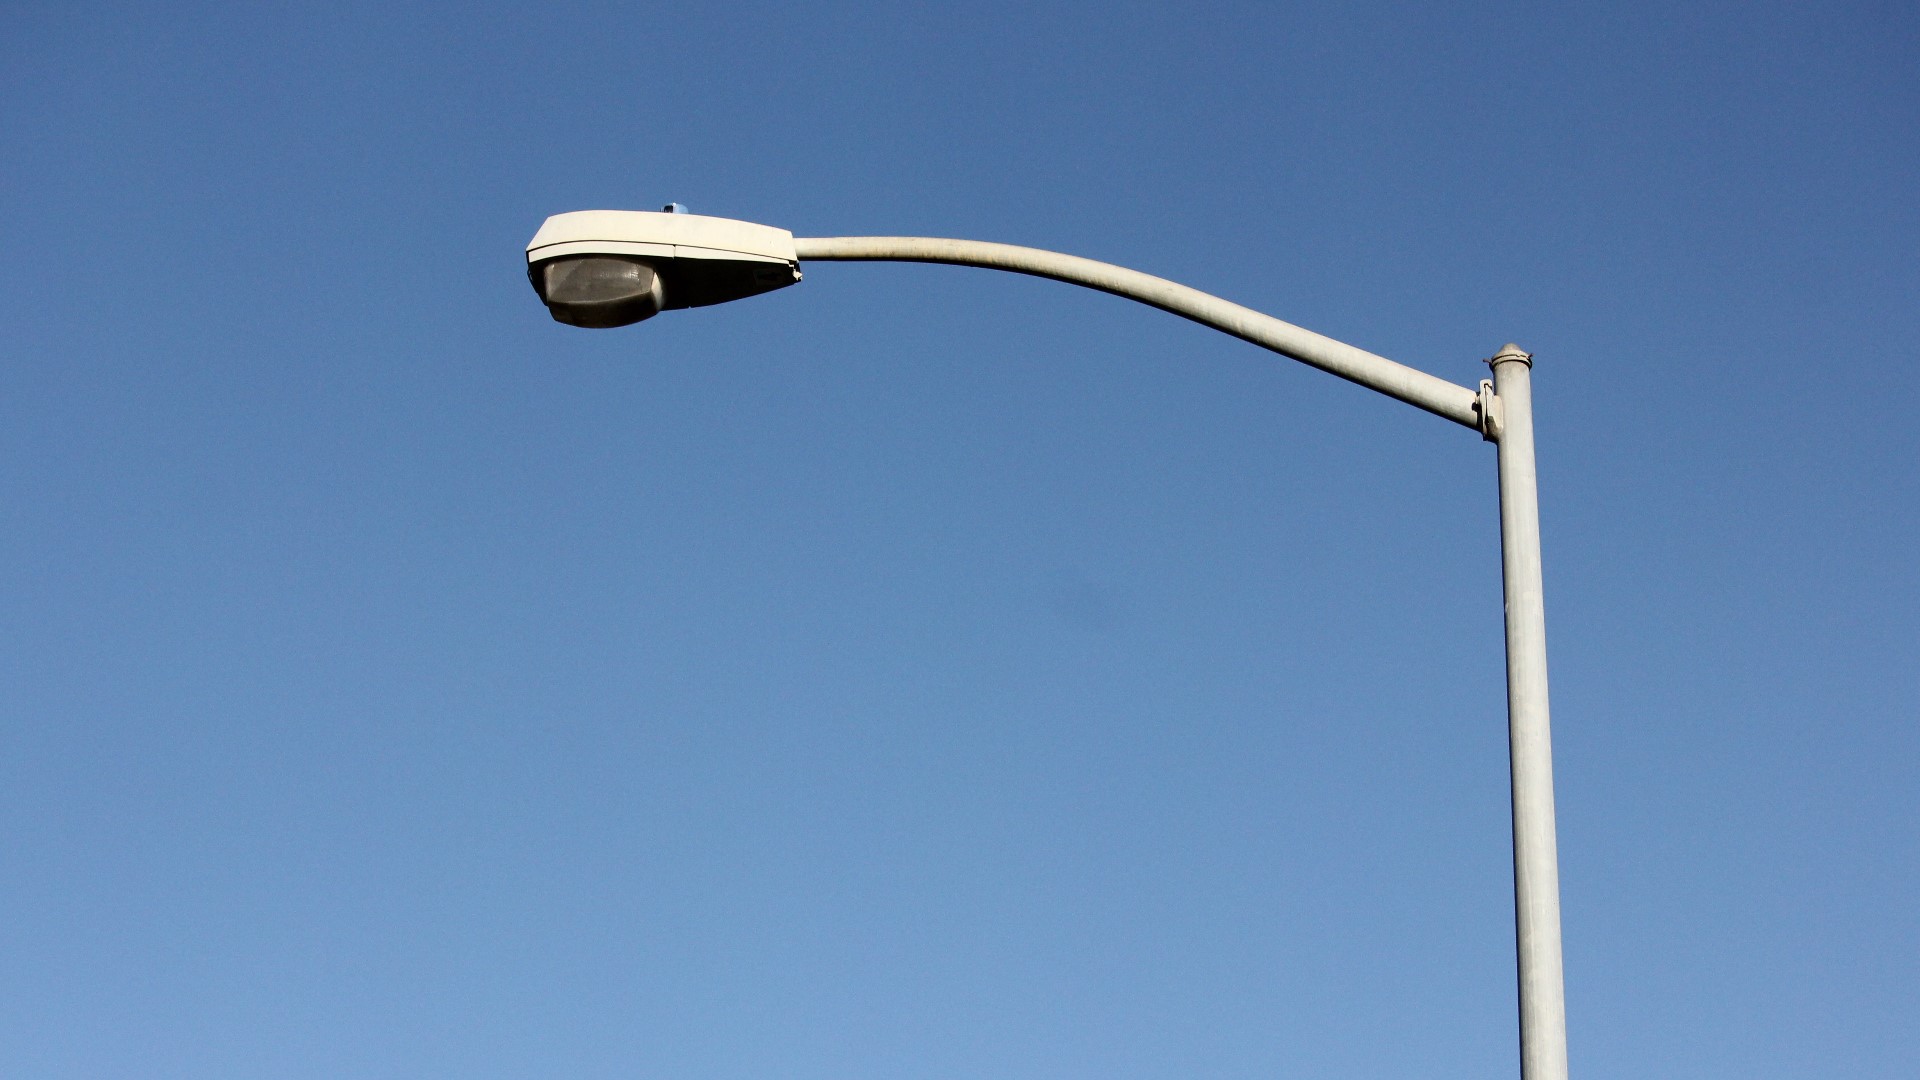 The city said the new partnership will aim to replace nearly 2,000 light fixtures citywide.